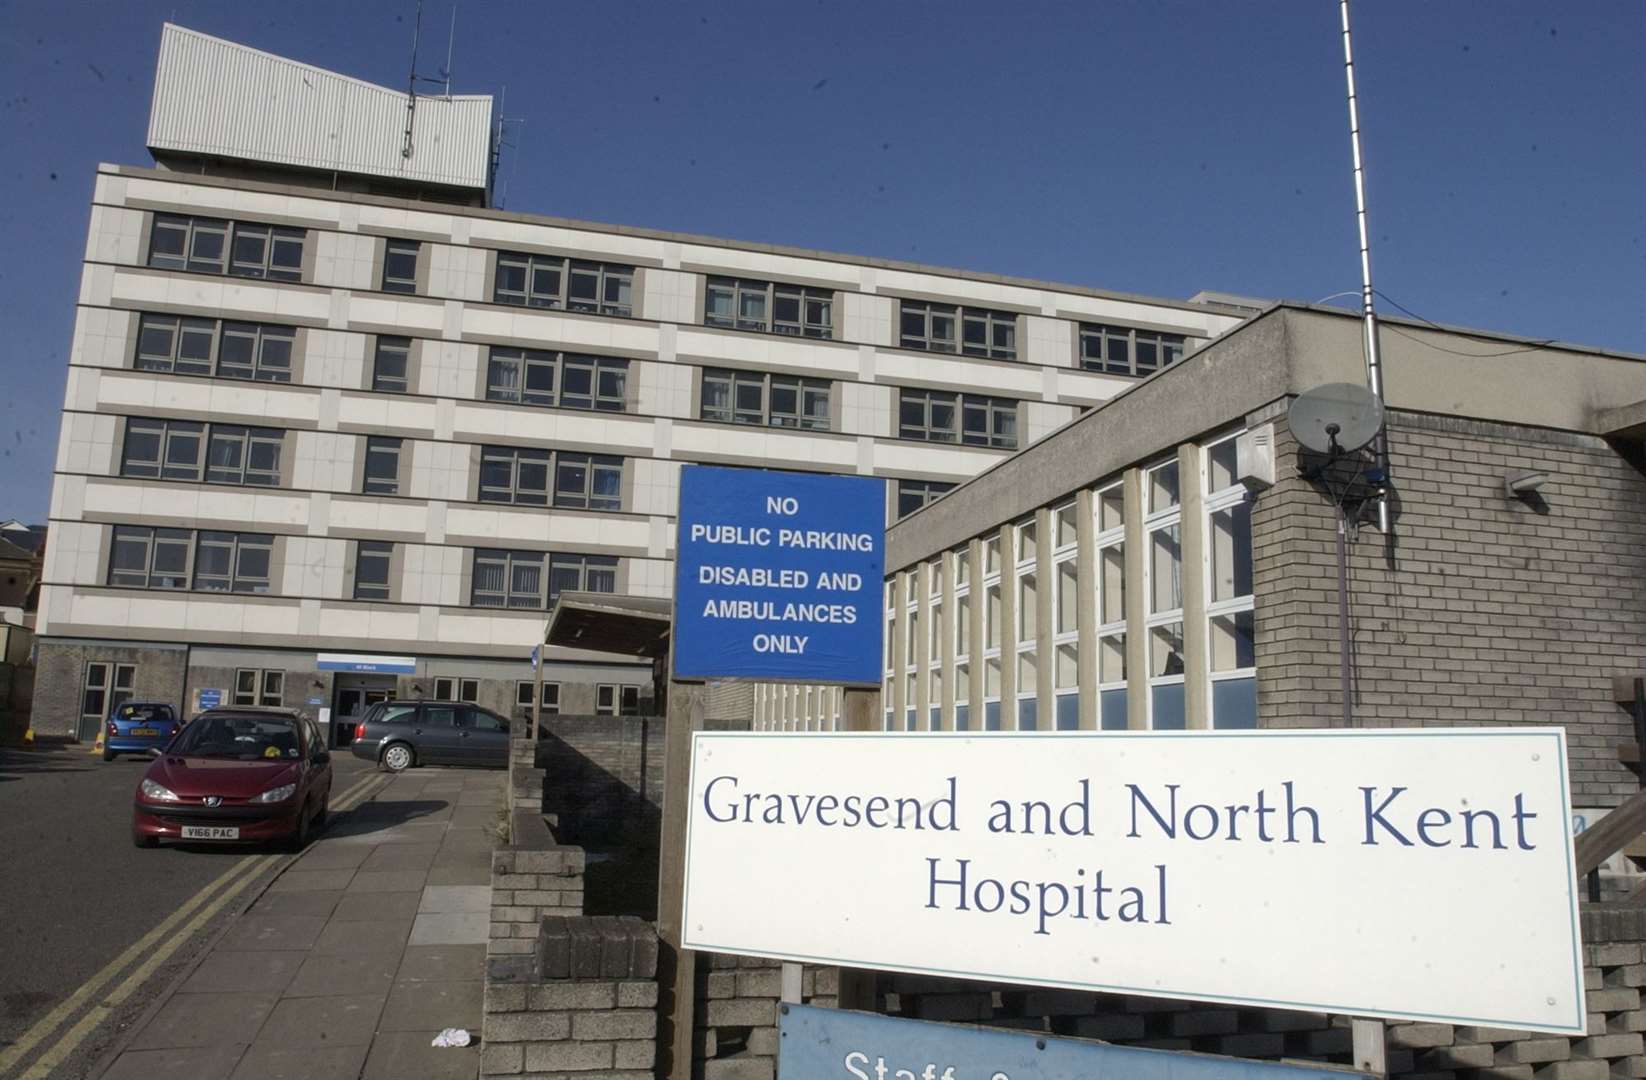 The building was once part of Gravesend and North Kent Hospital